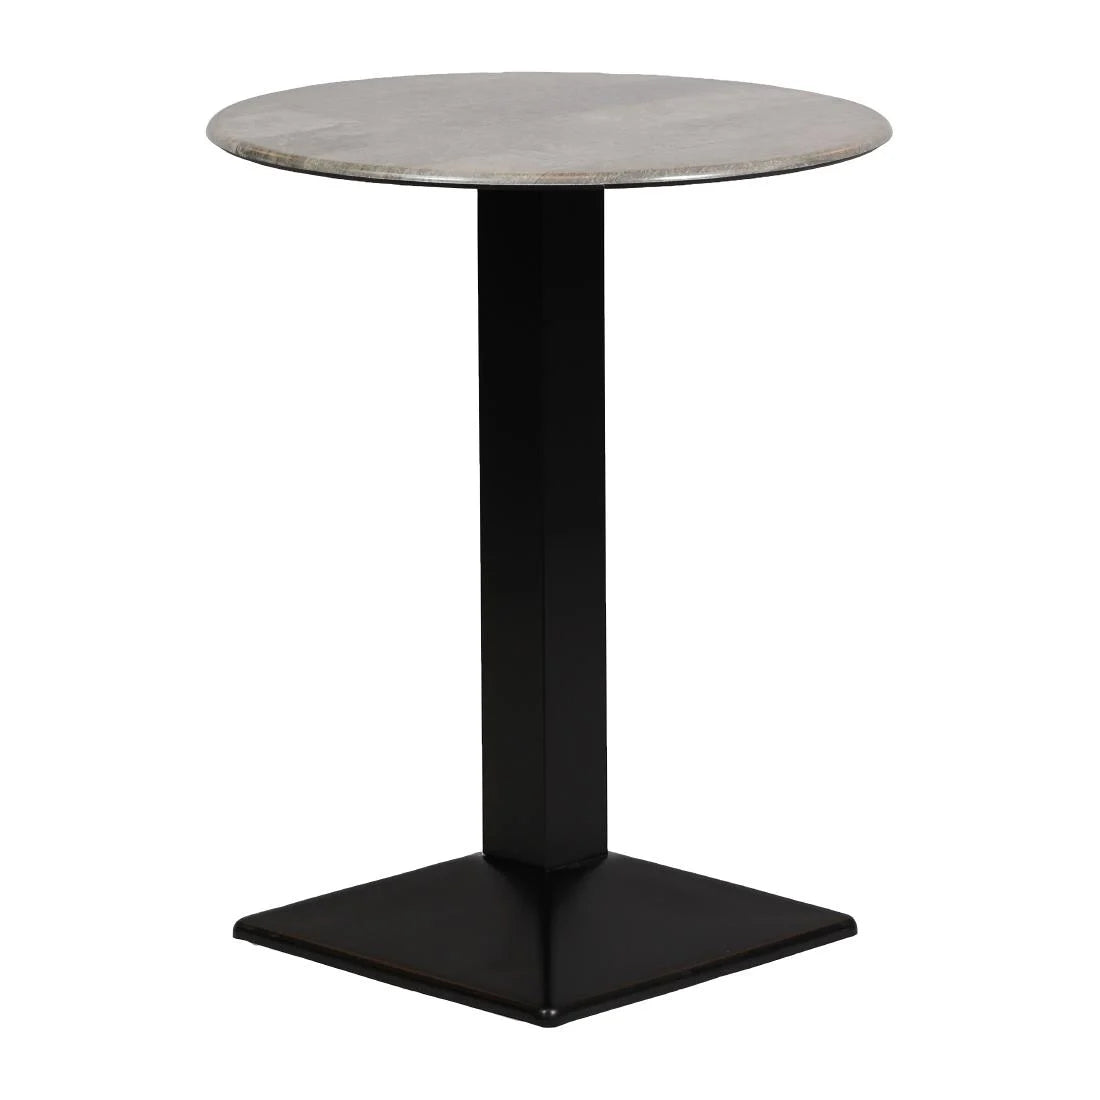 CZ835 Turin Metal Base Round Poseur Table with Laminate Top Concrete 600mm JD Catering Equipment Solutions Ltd